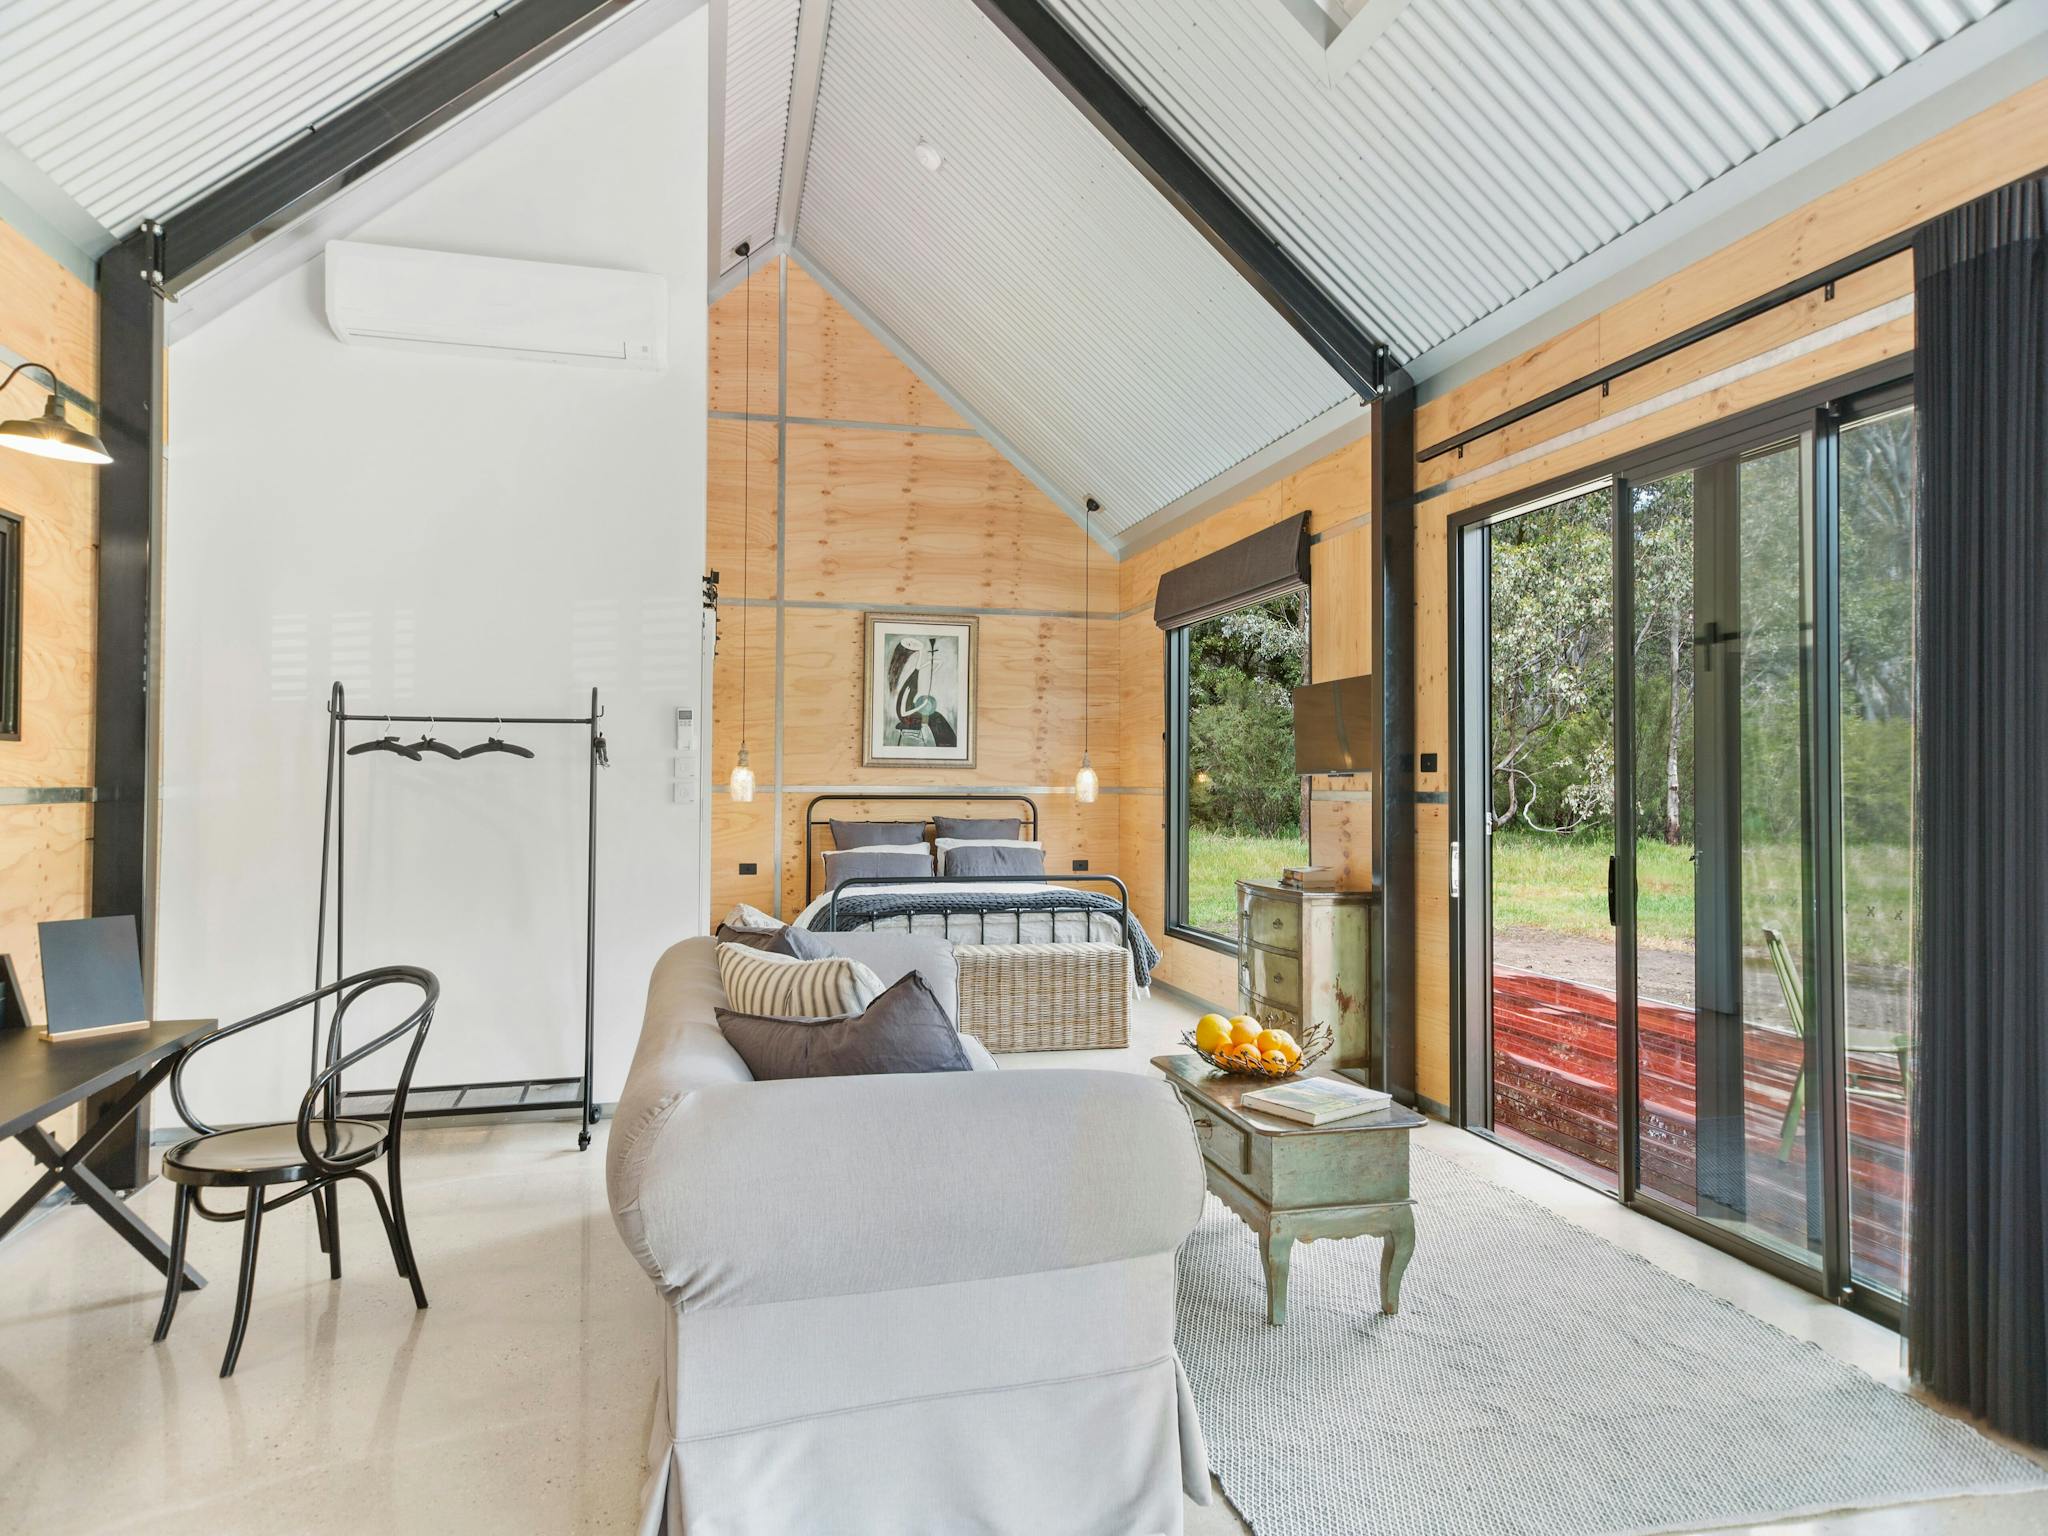 Shed ONE - Studio Style, ensuite, queen bed, cultiver linen, cathedral ceiling, picture windows